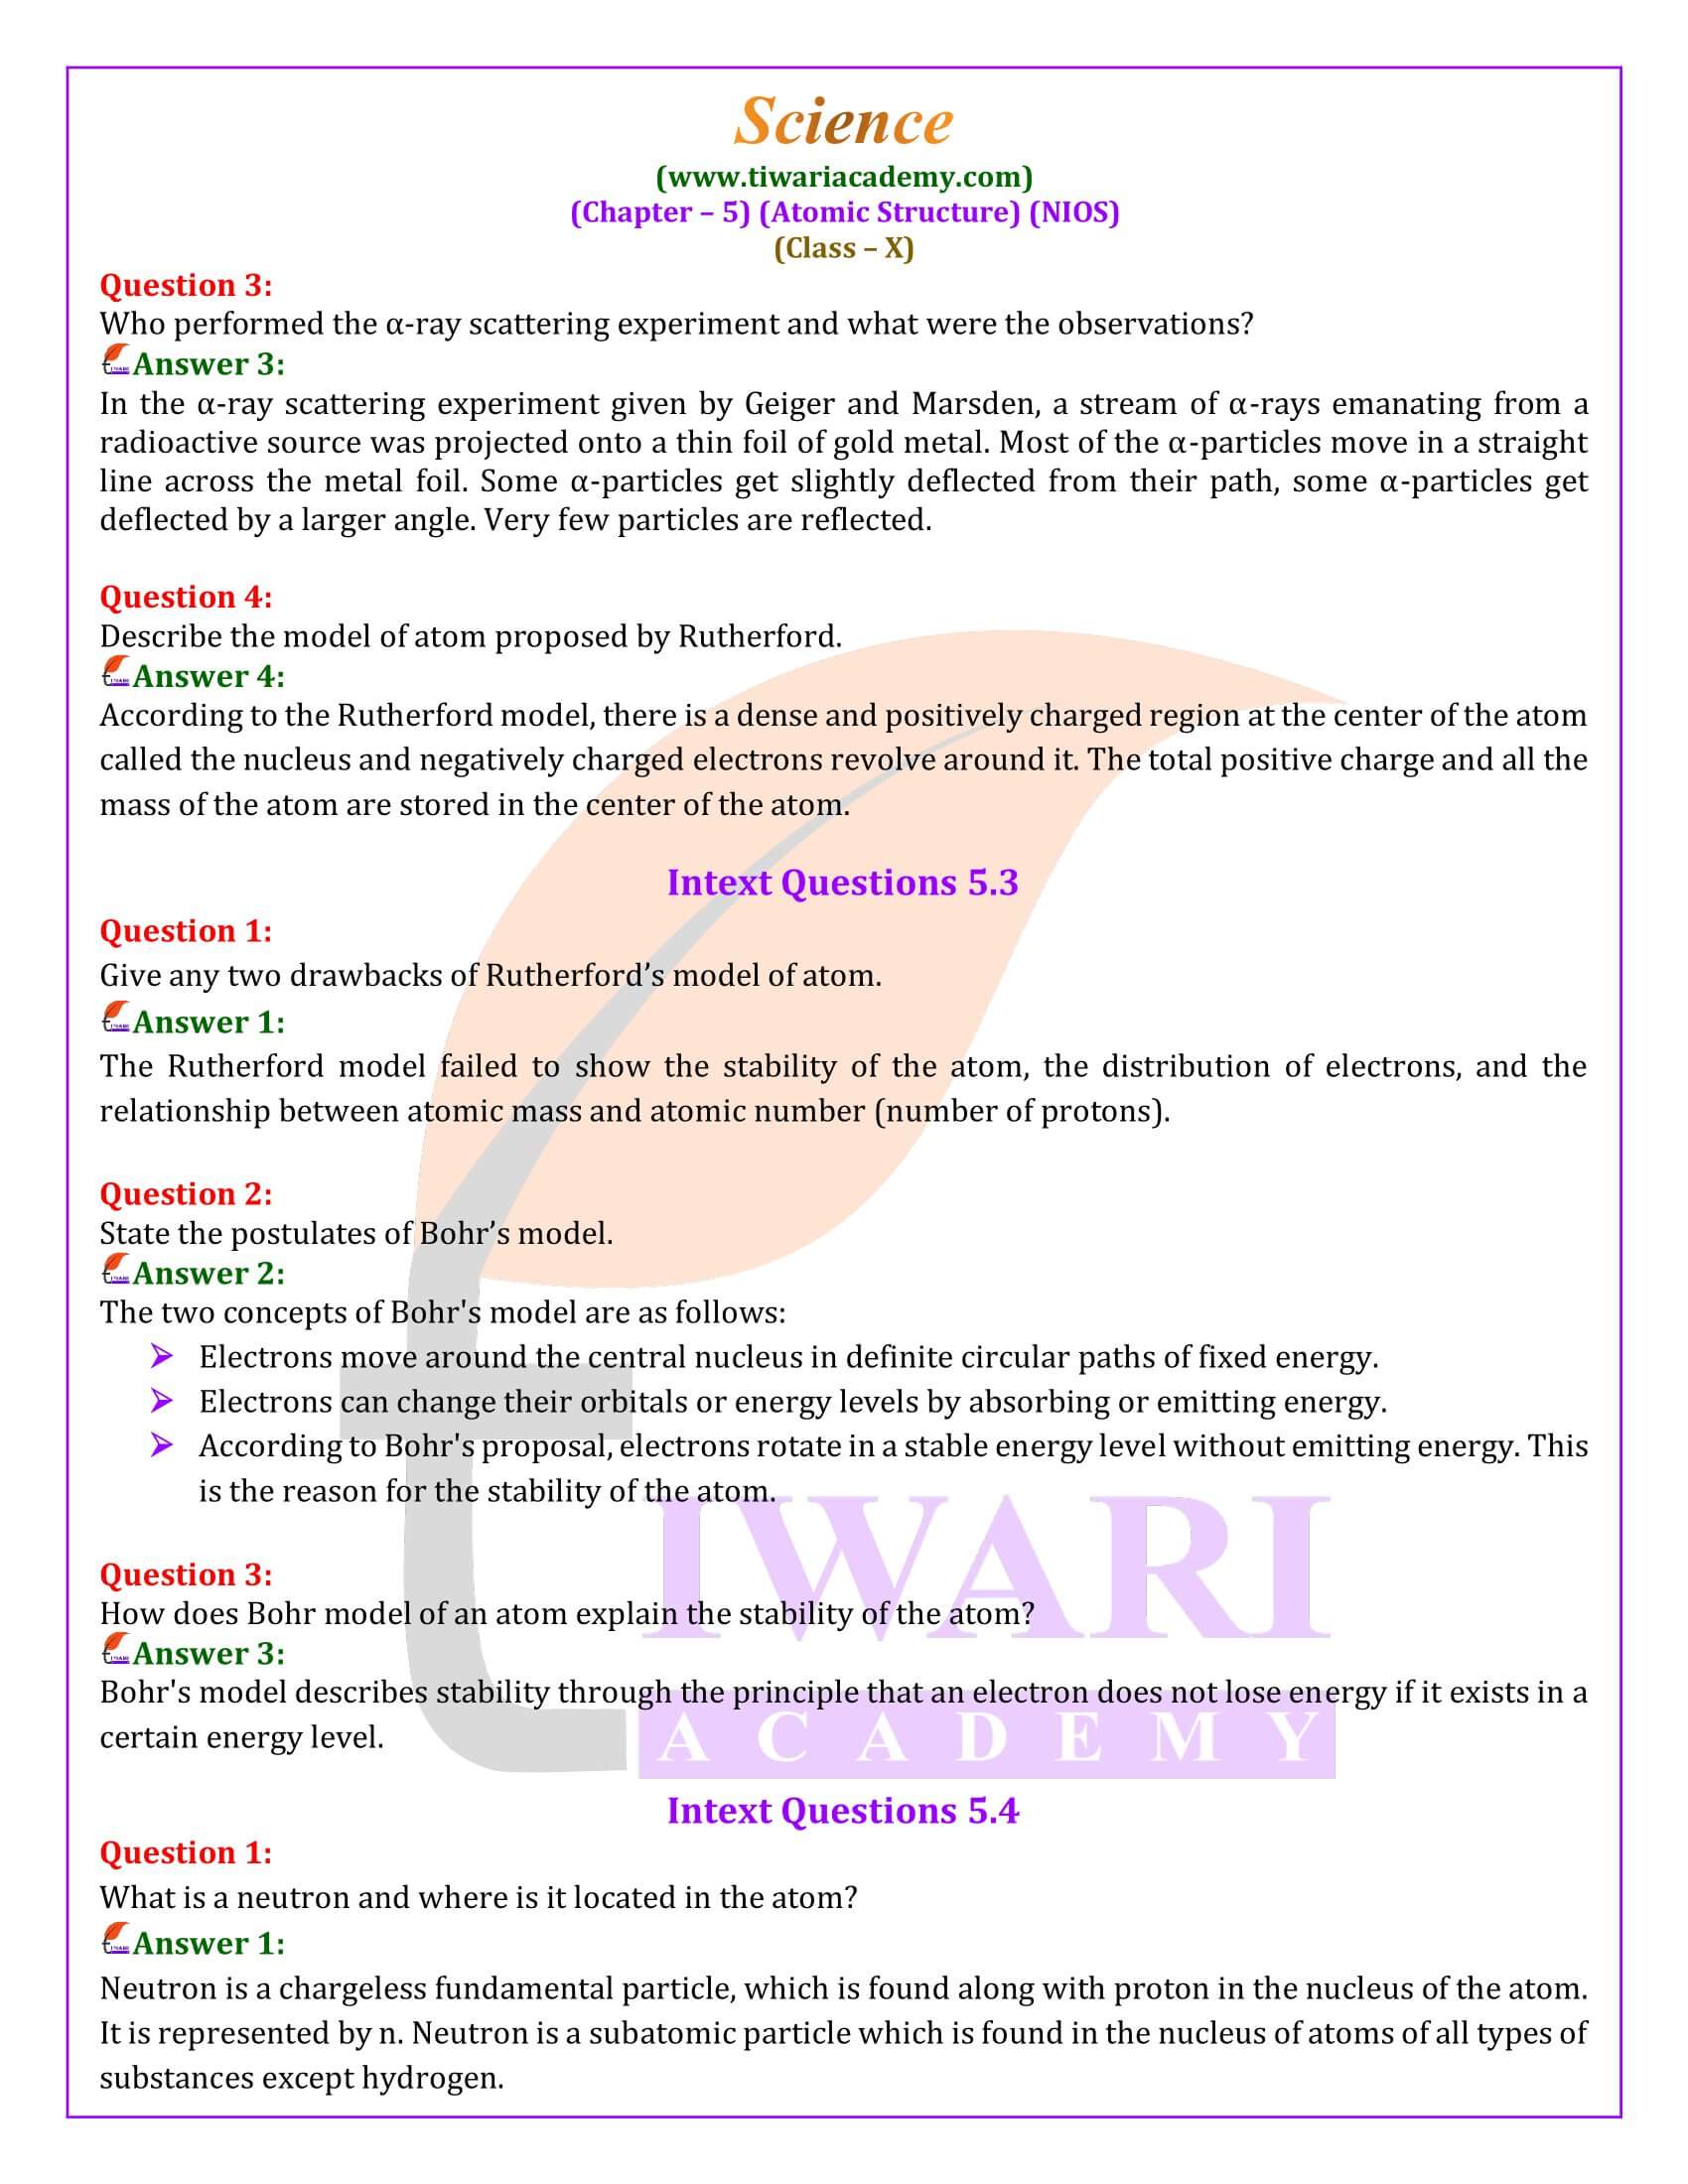 NIOS Class 10 Science Chapter 5 Atomic Structure Exercises Answers